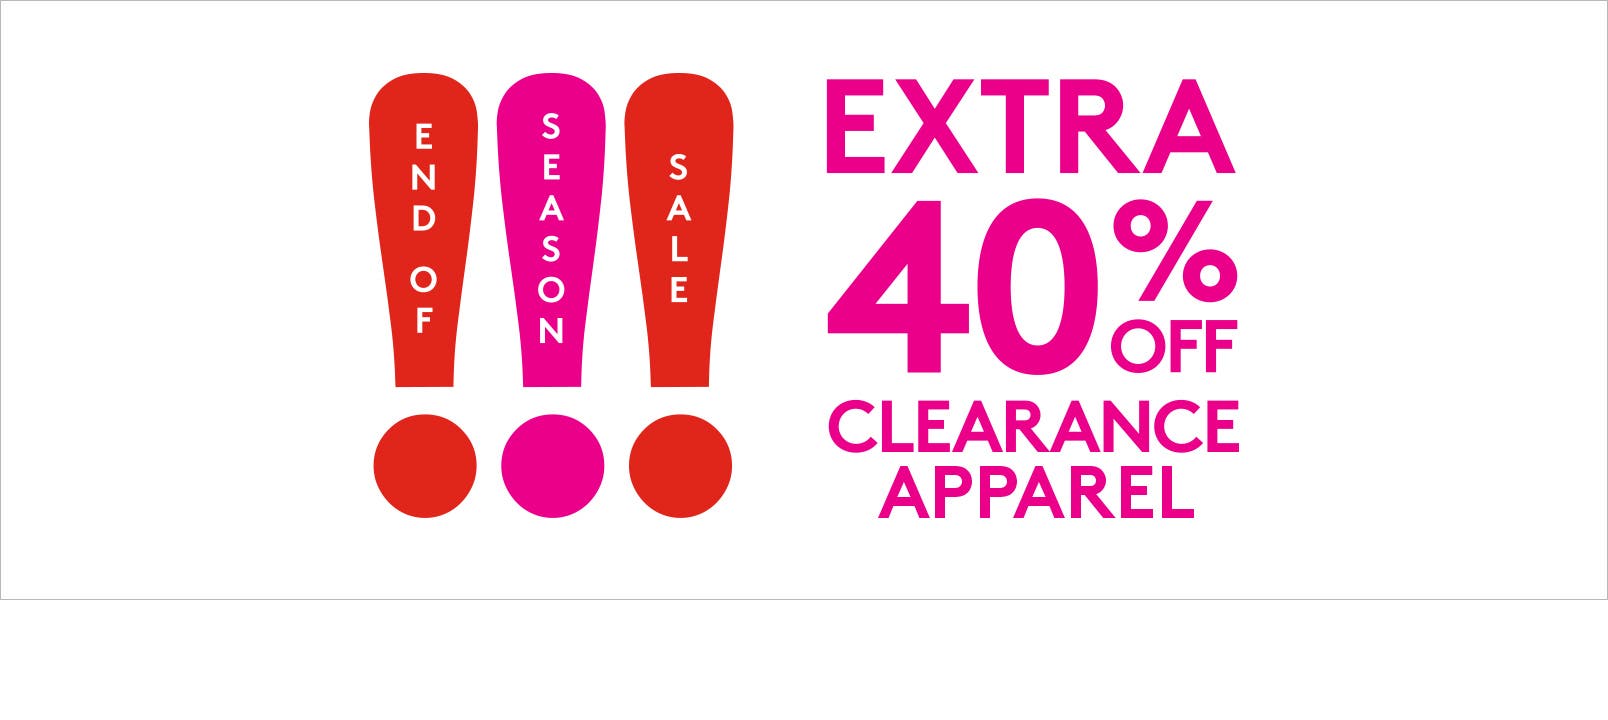 End-of-Season Sale extra forty percent off selected clearance apparel.